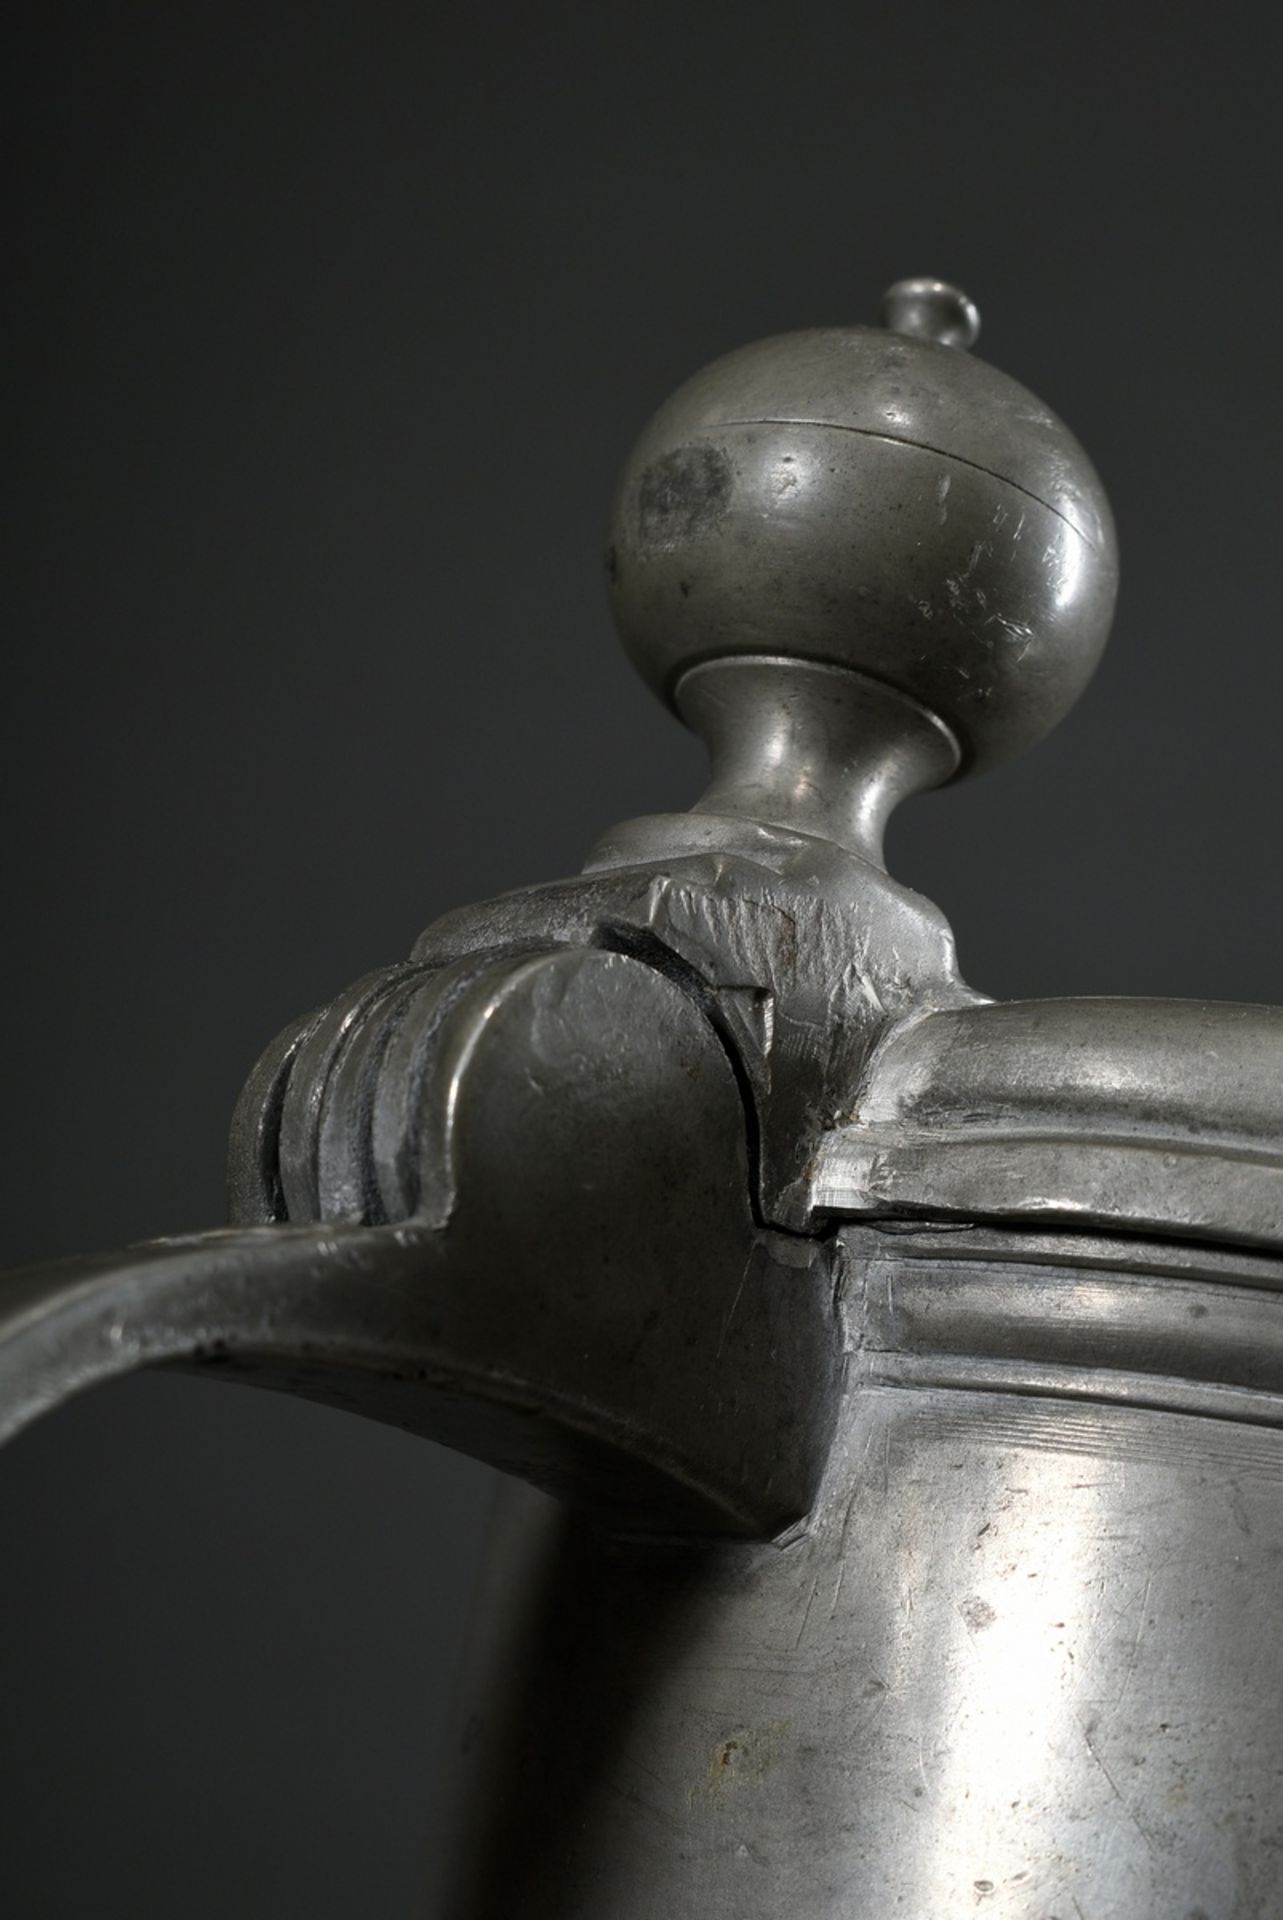 Tall pewter lidded tankard with floral engraved decoration and owner's inscription "Asmus Hinrich M - Image 4 of 8